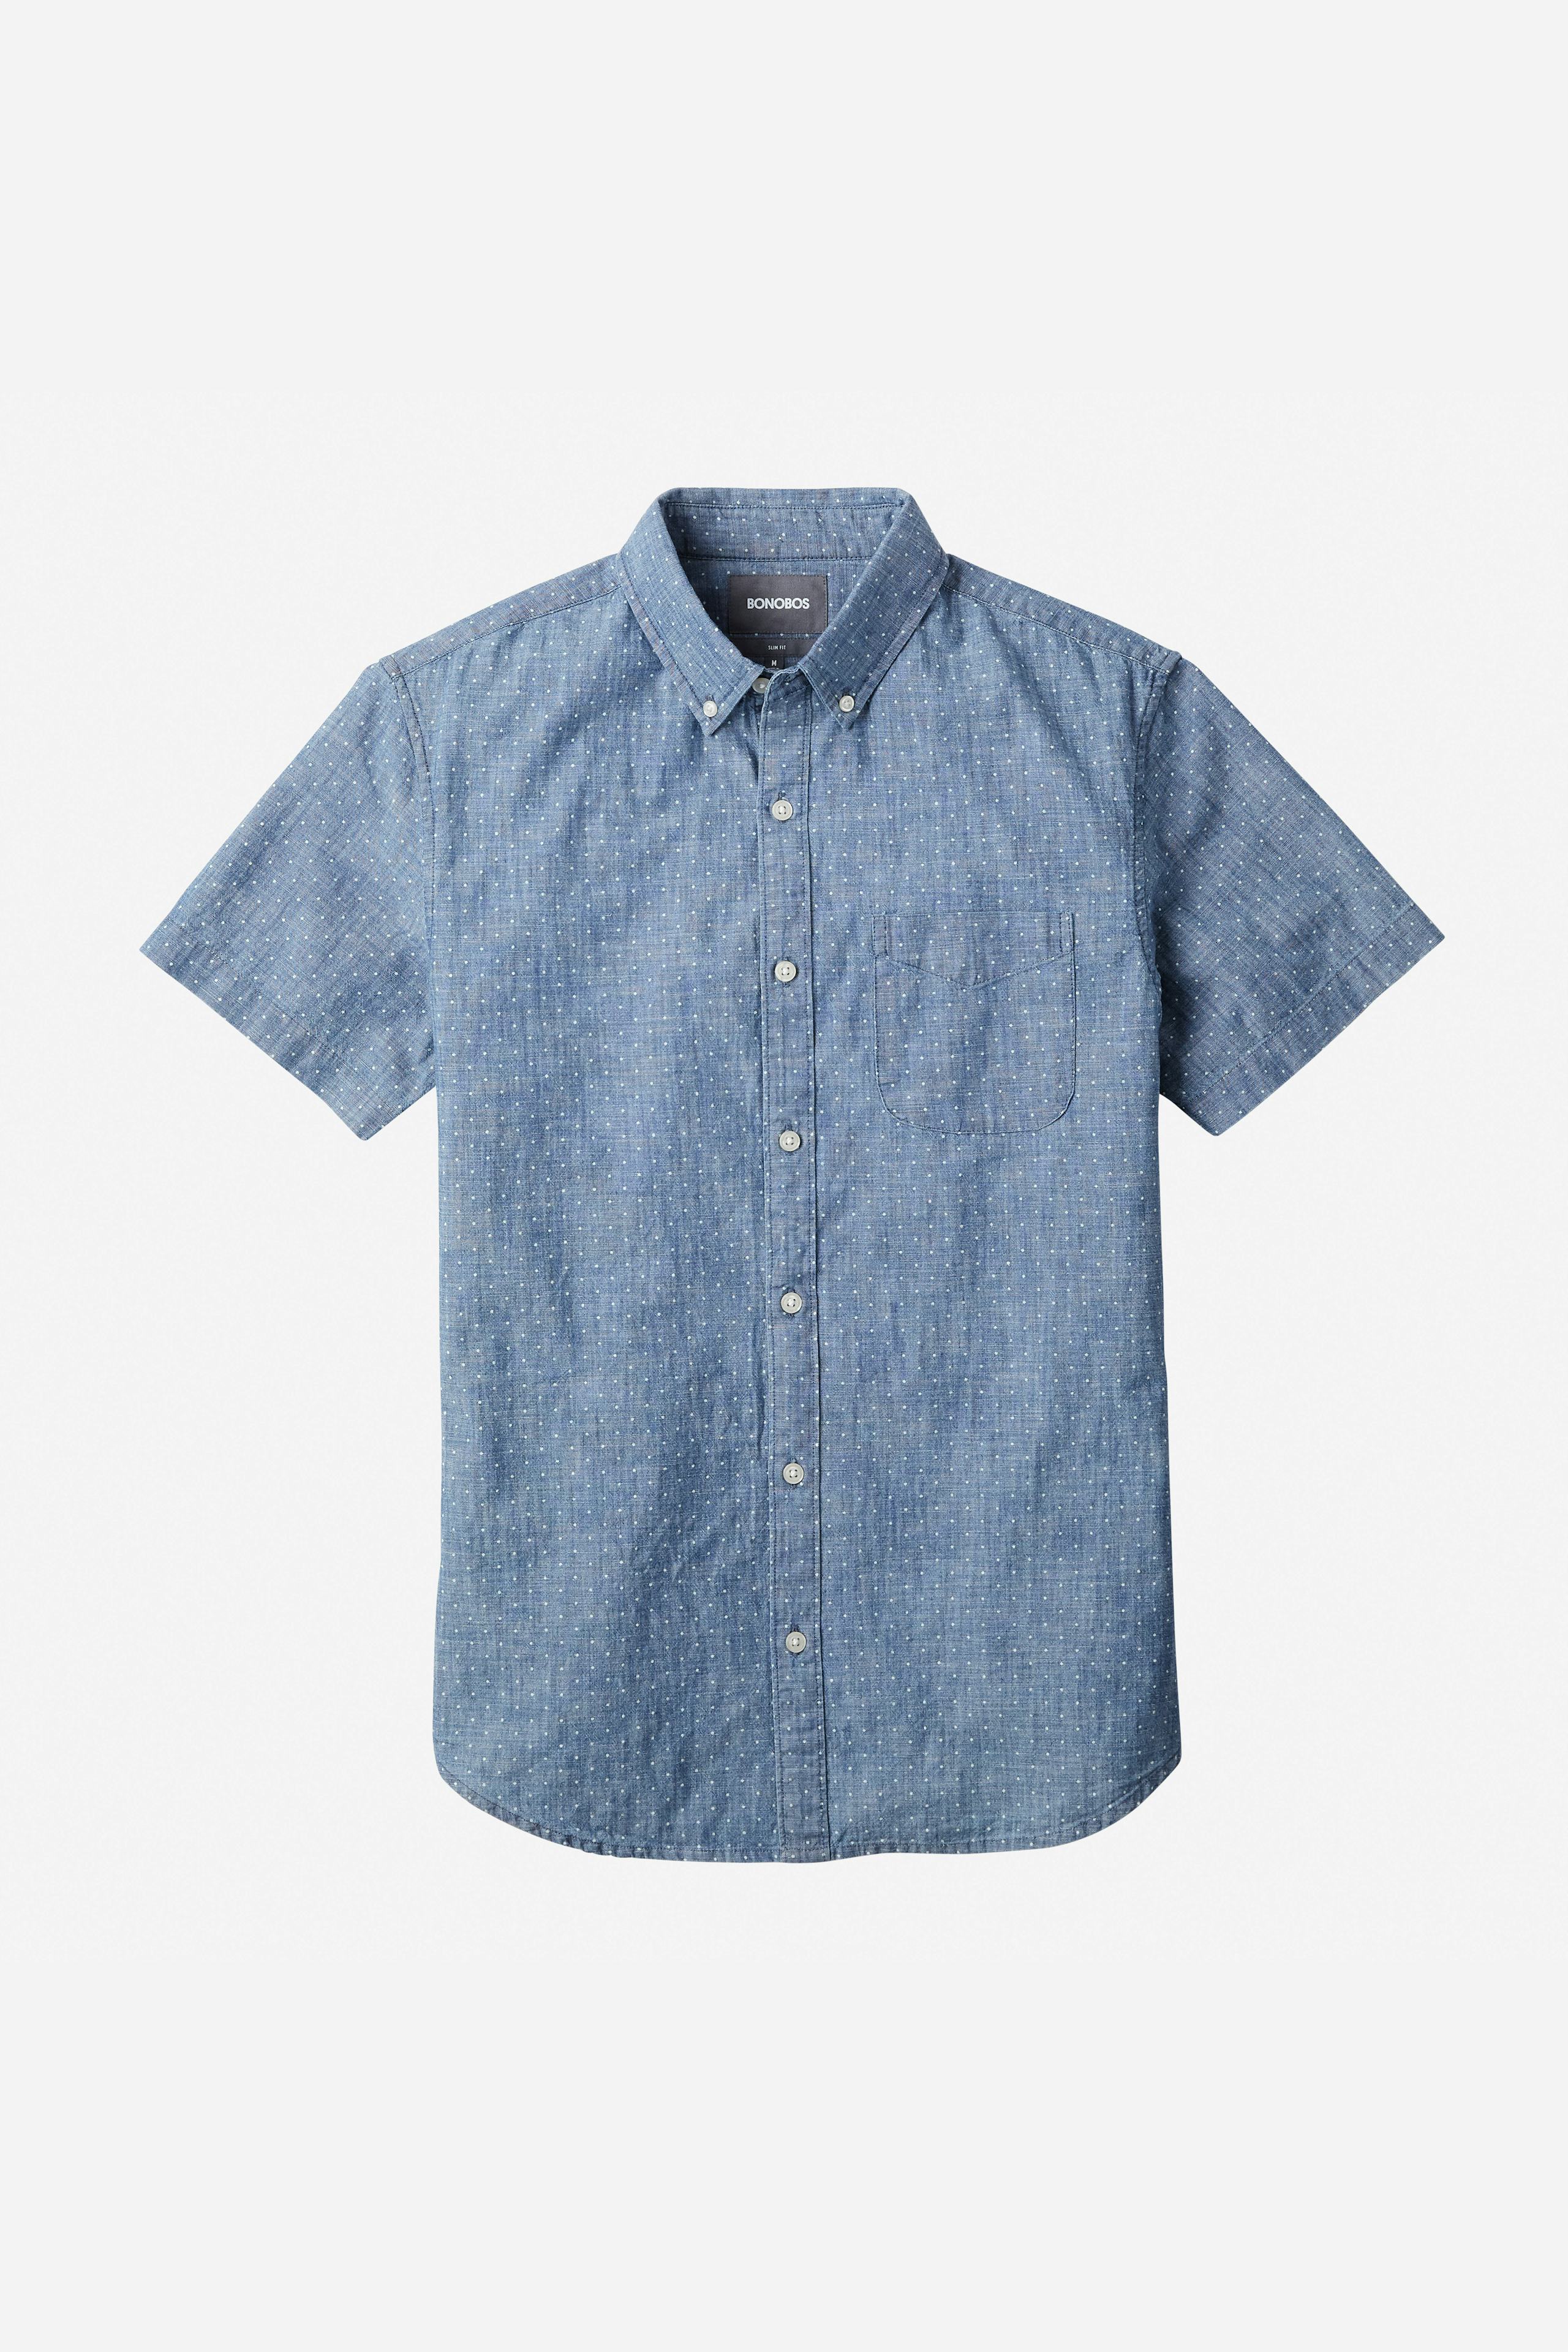 Riviera Short Sleeve Shirt Extended Sizes